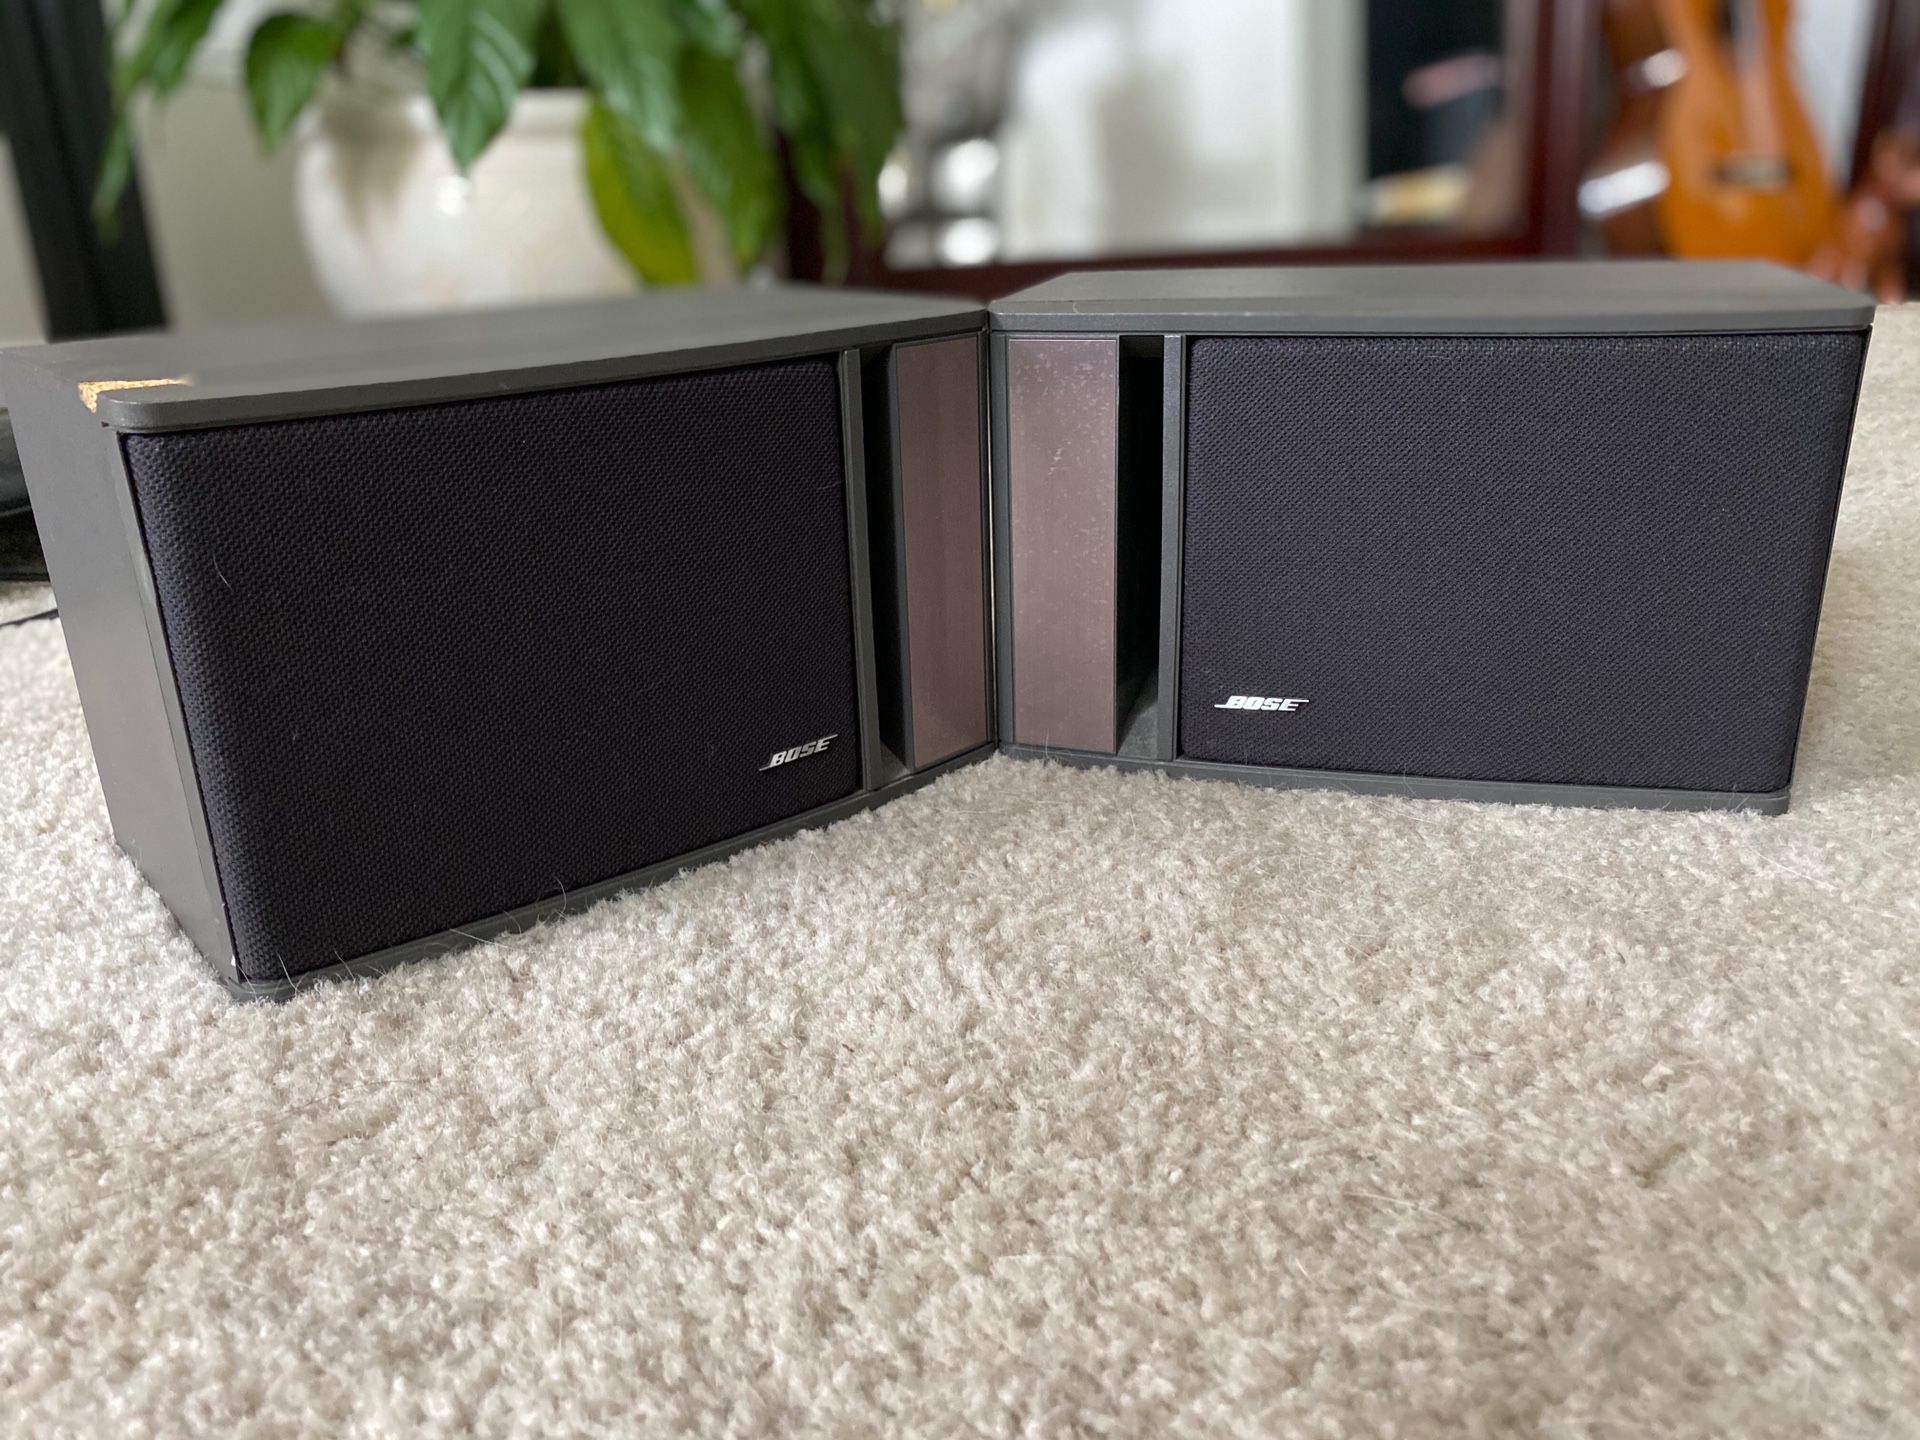 JAM OUT with this SET OF BOSE SPEAKERS!